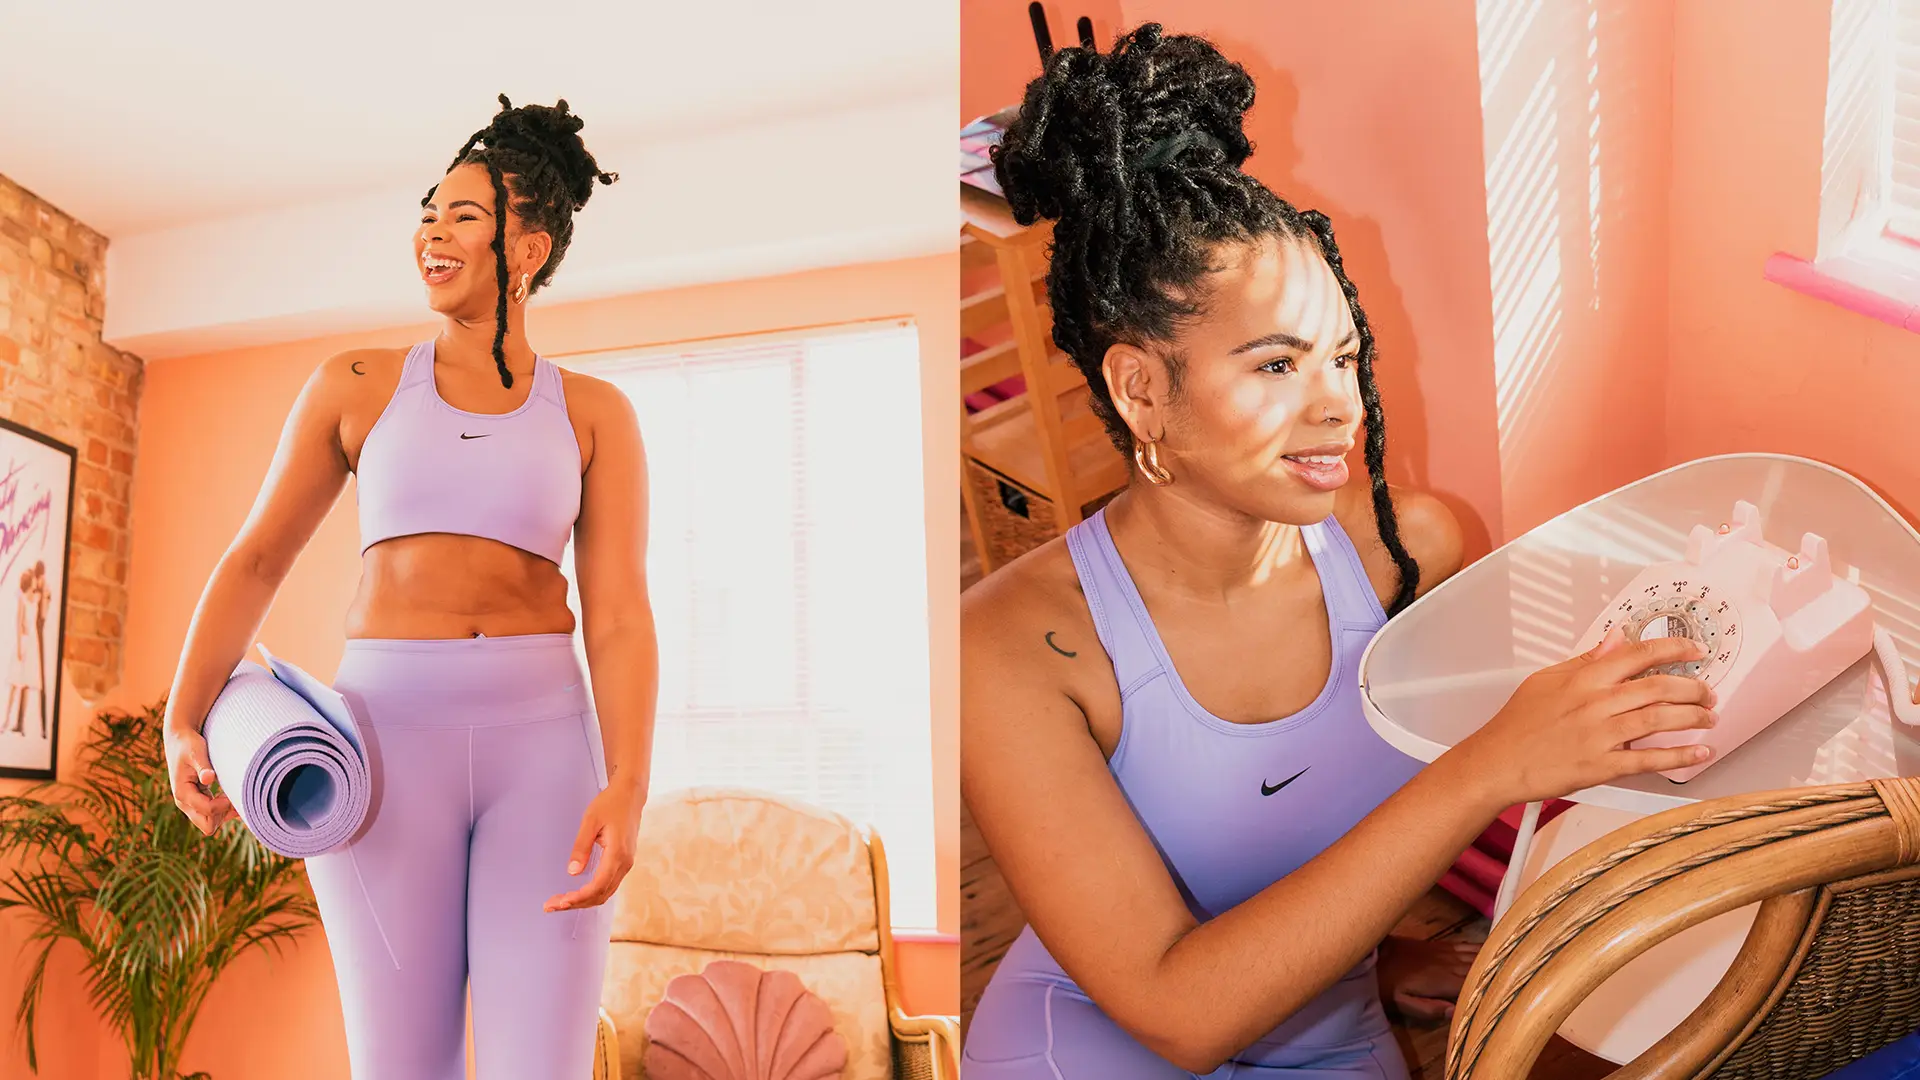 Why The Nike Go Leggings Should Be Your New Go-To Pair